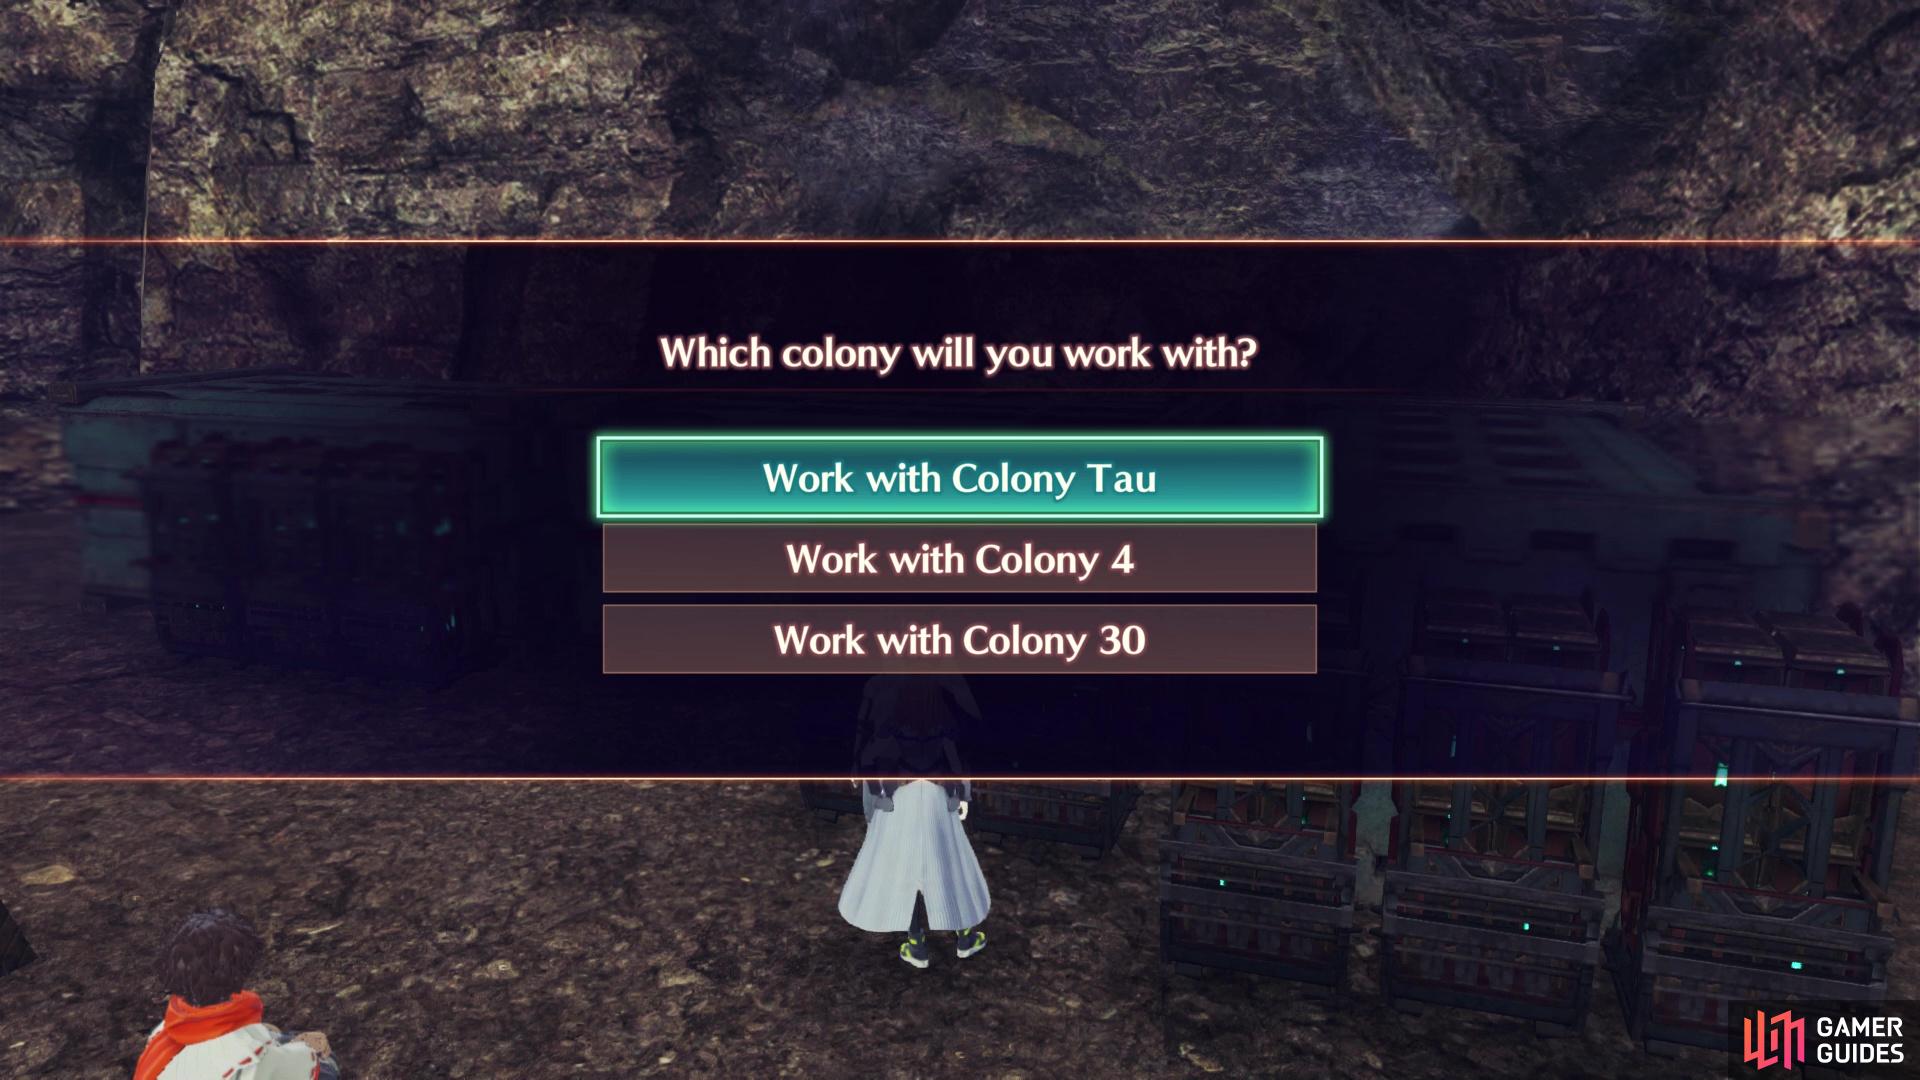 There’s really no wrong answers in this quest, as you will be allowed to pick another option